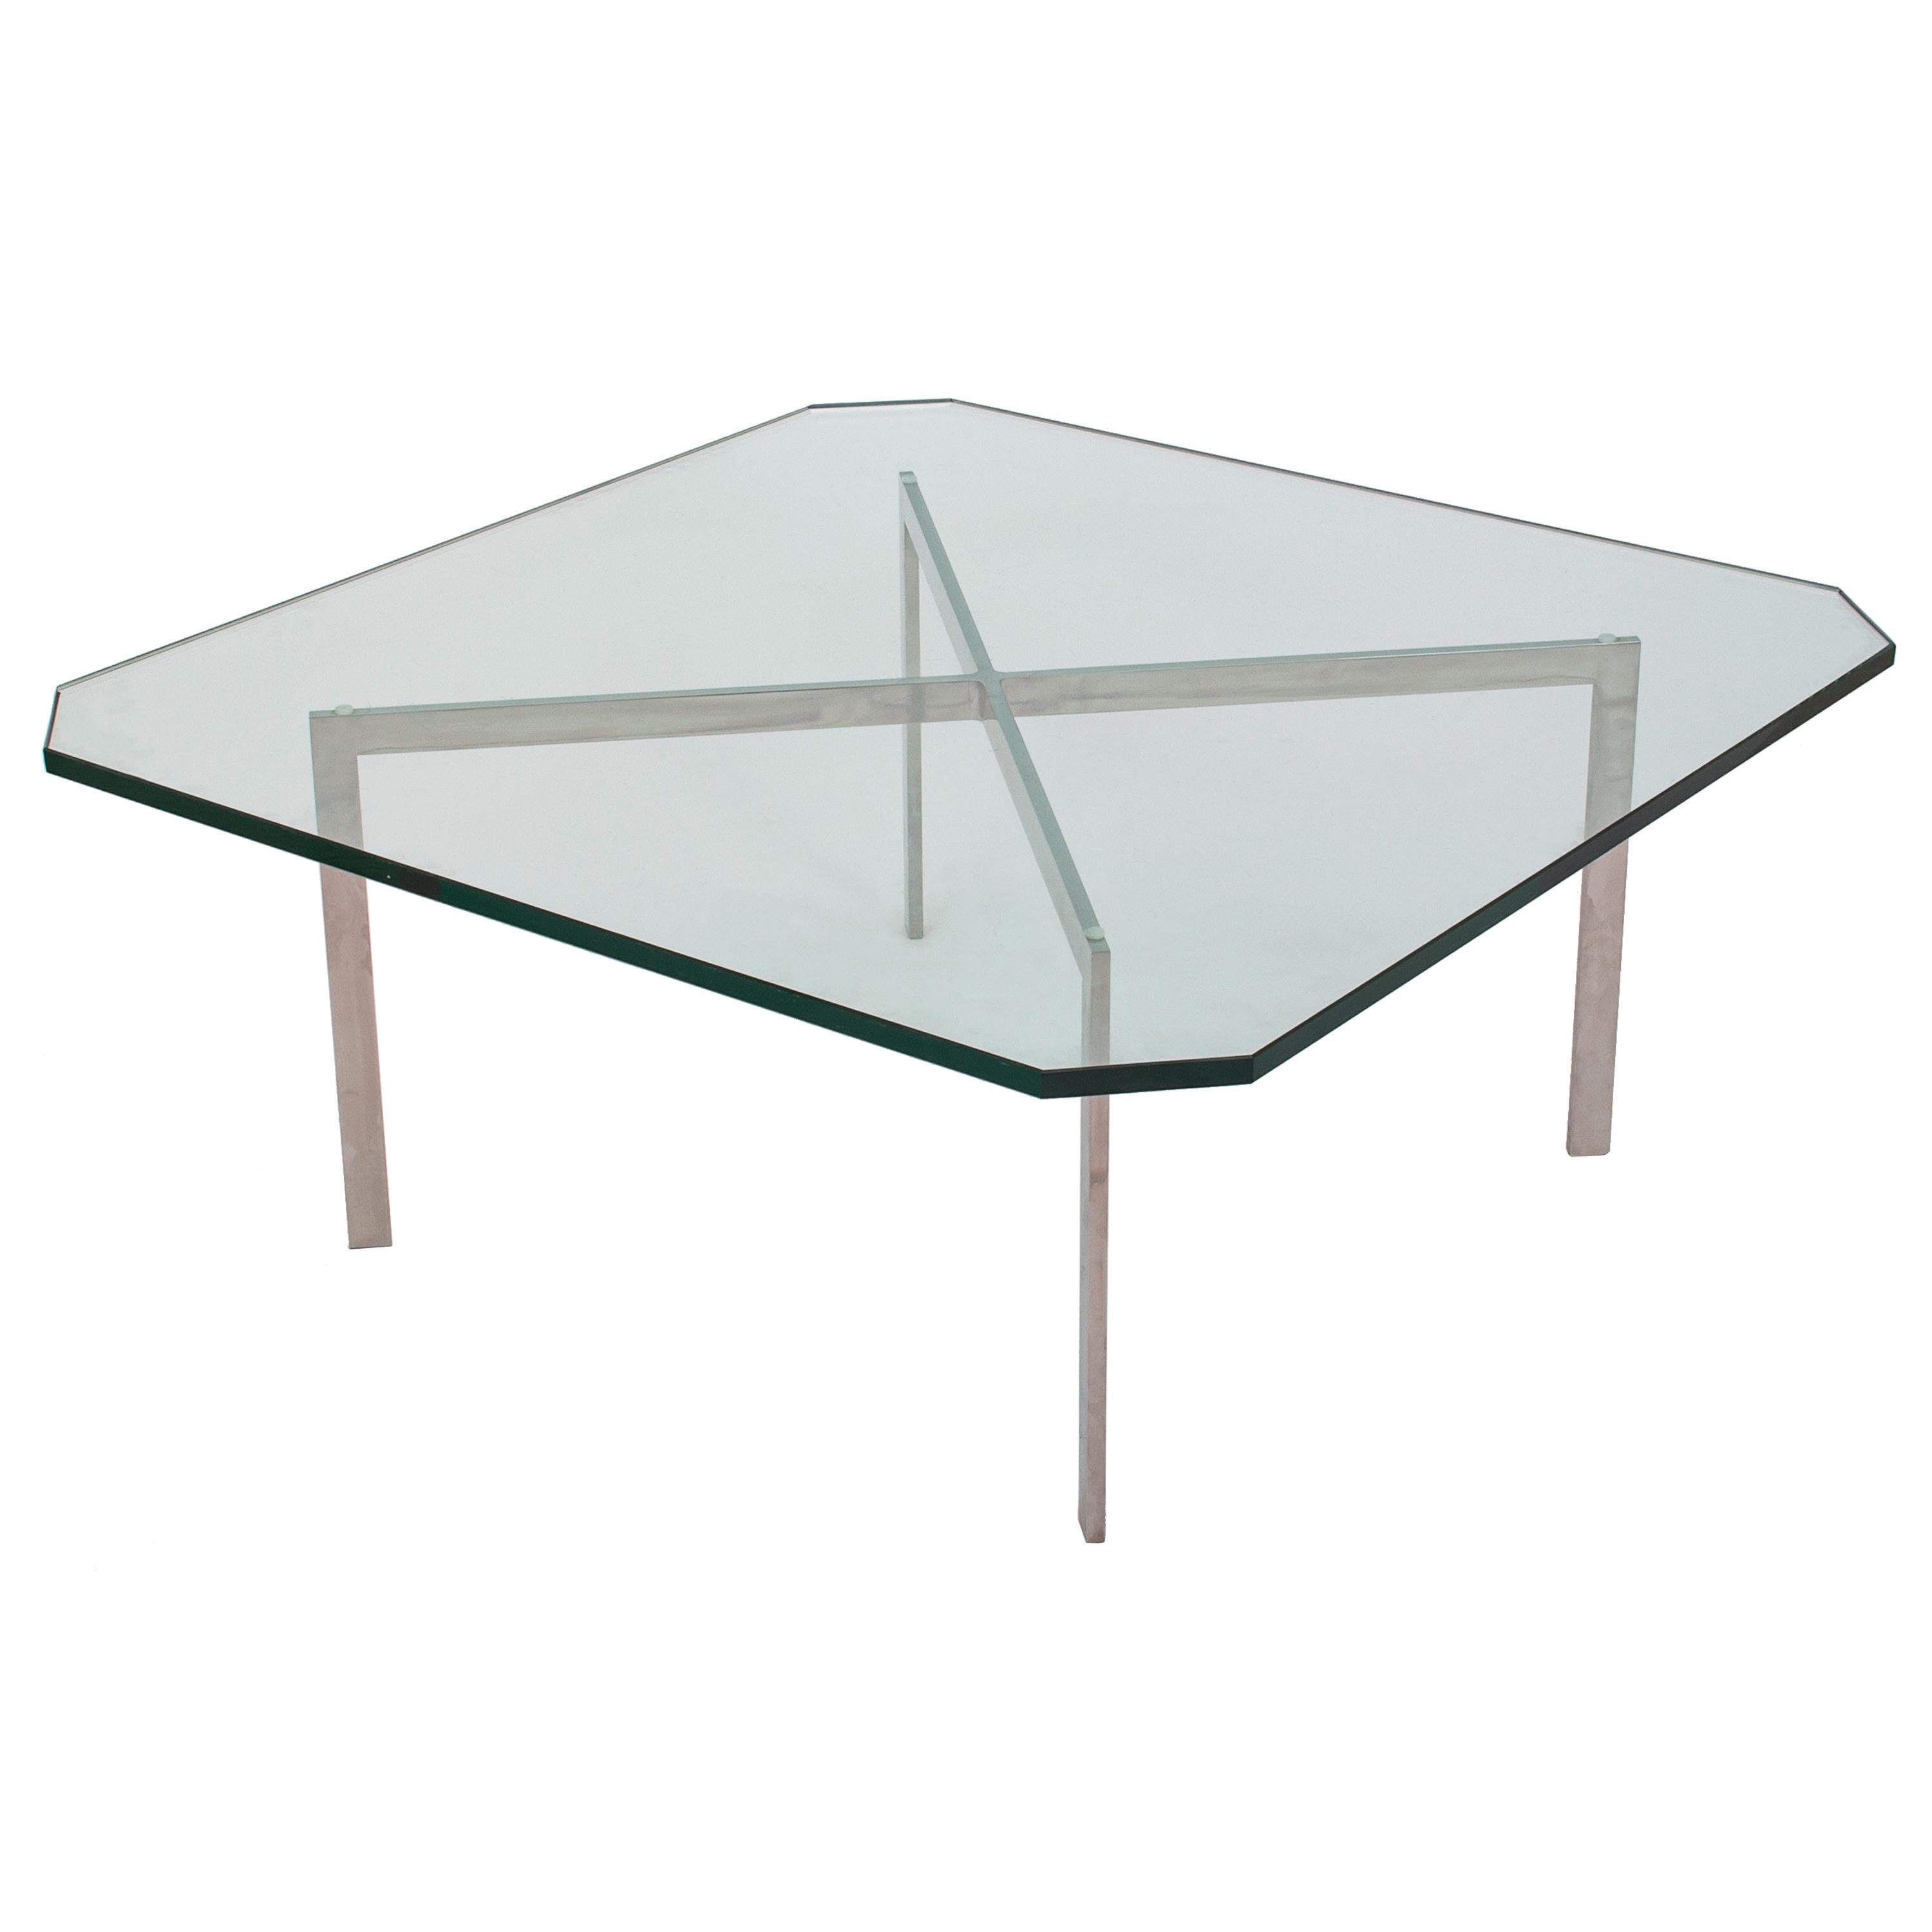 20th Century Mid Century Glass Stainless Steel Barcelona Table Mies Van Der Rohe Knoll 1955 For Sale